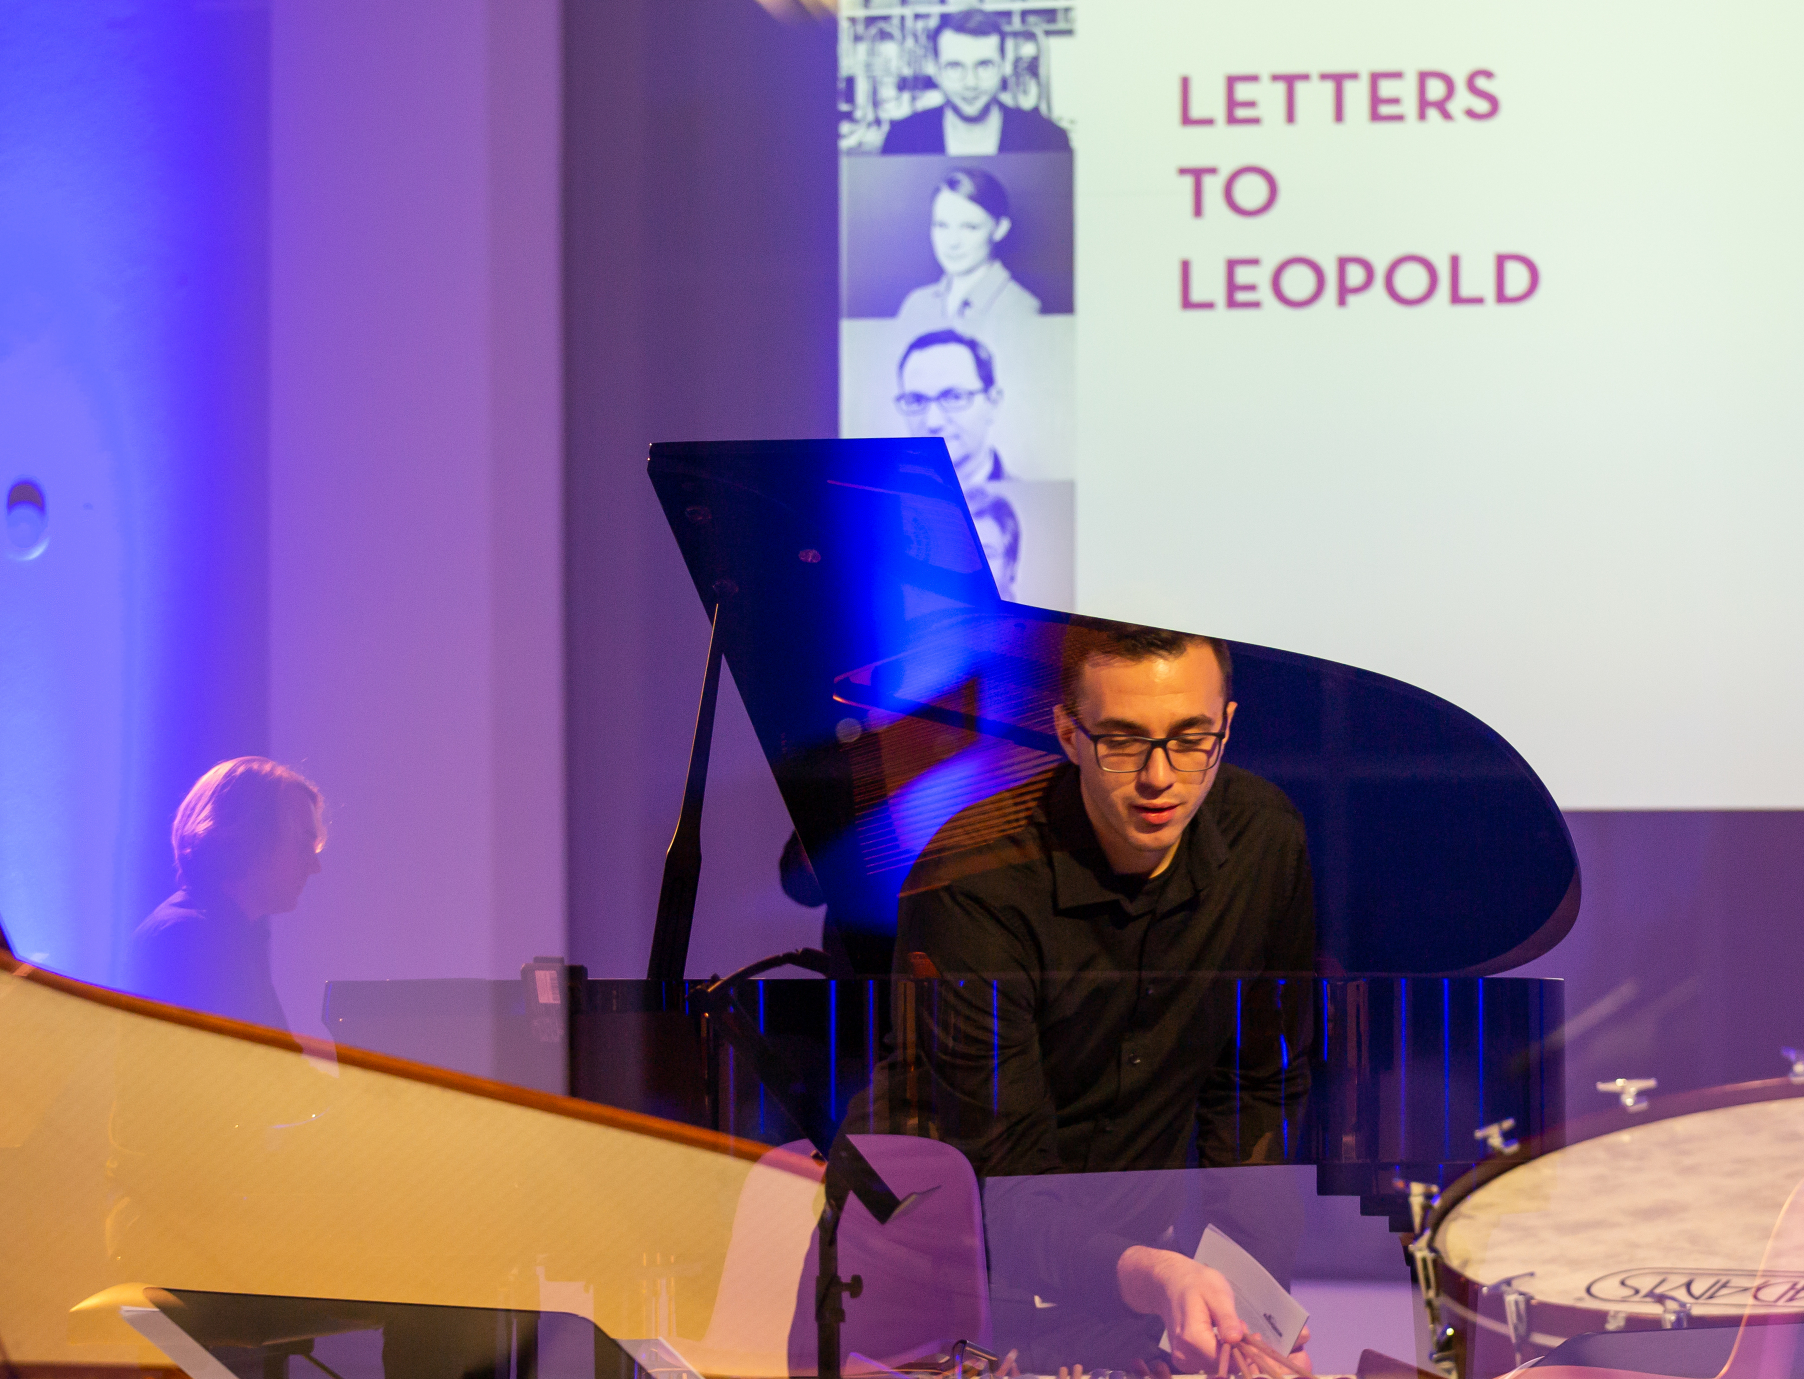 2019: LETTERS TO LEOPOLD